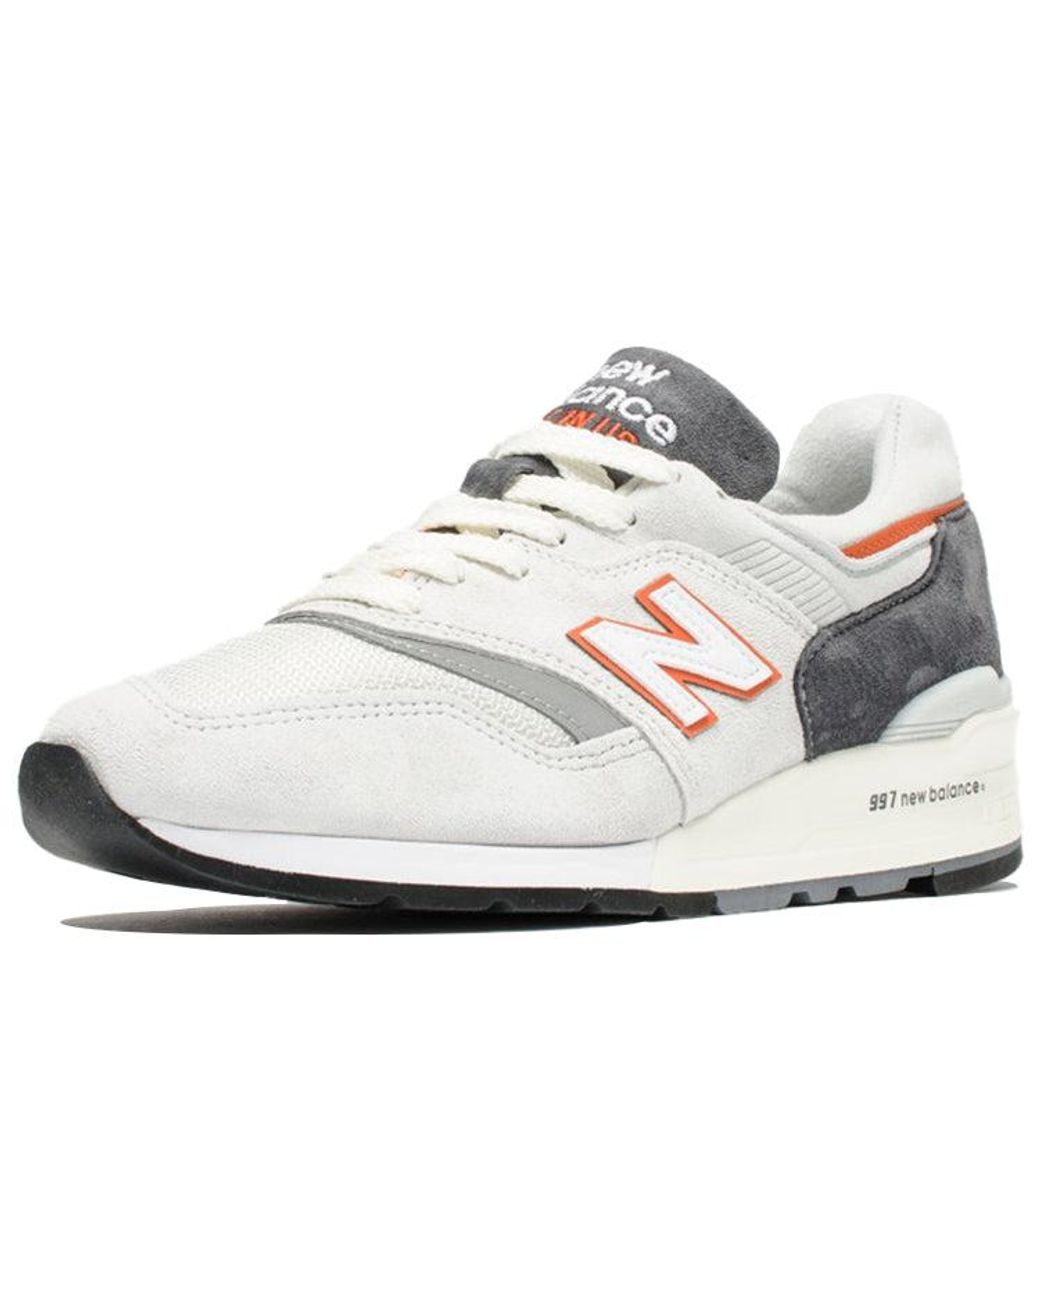 New Balance 997 Series Retro Low Top Casual White Gray Orange Made In Usa |  Lyst